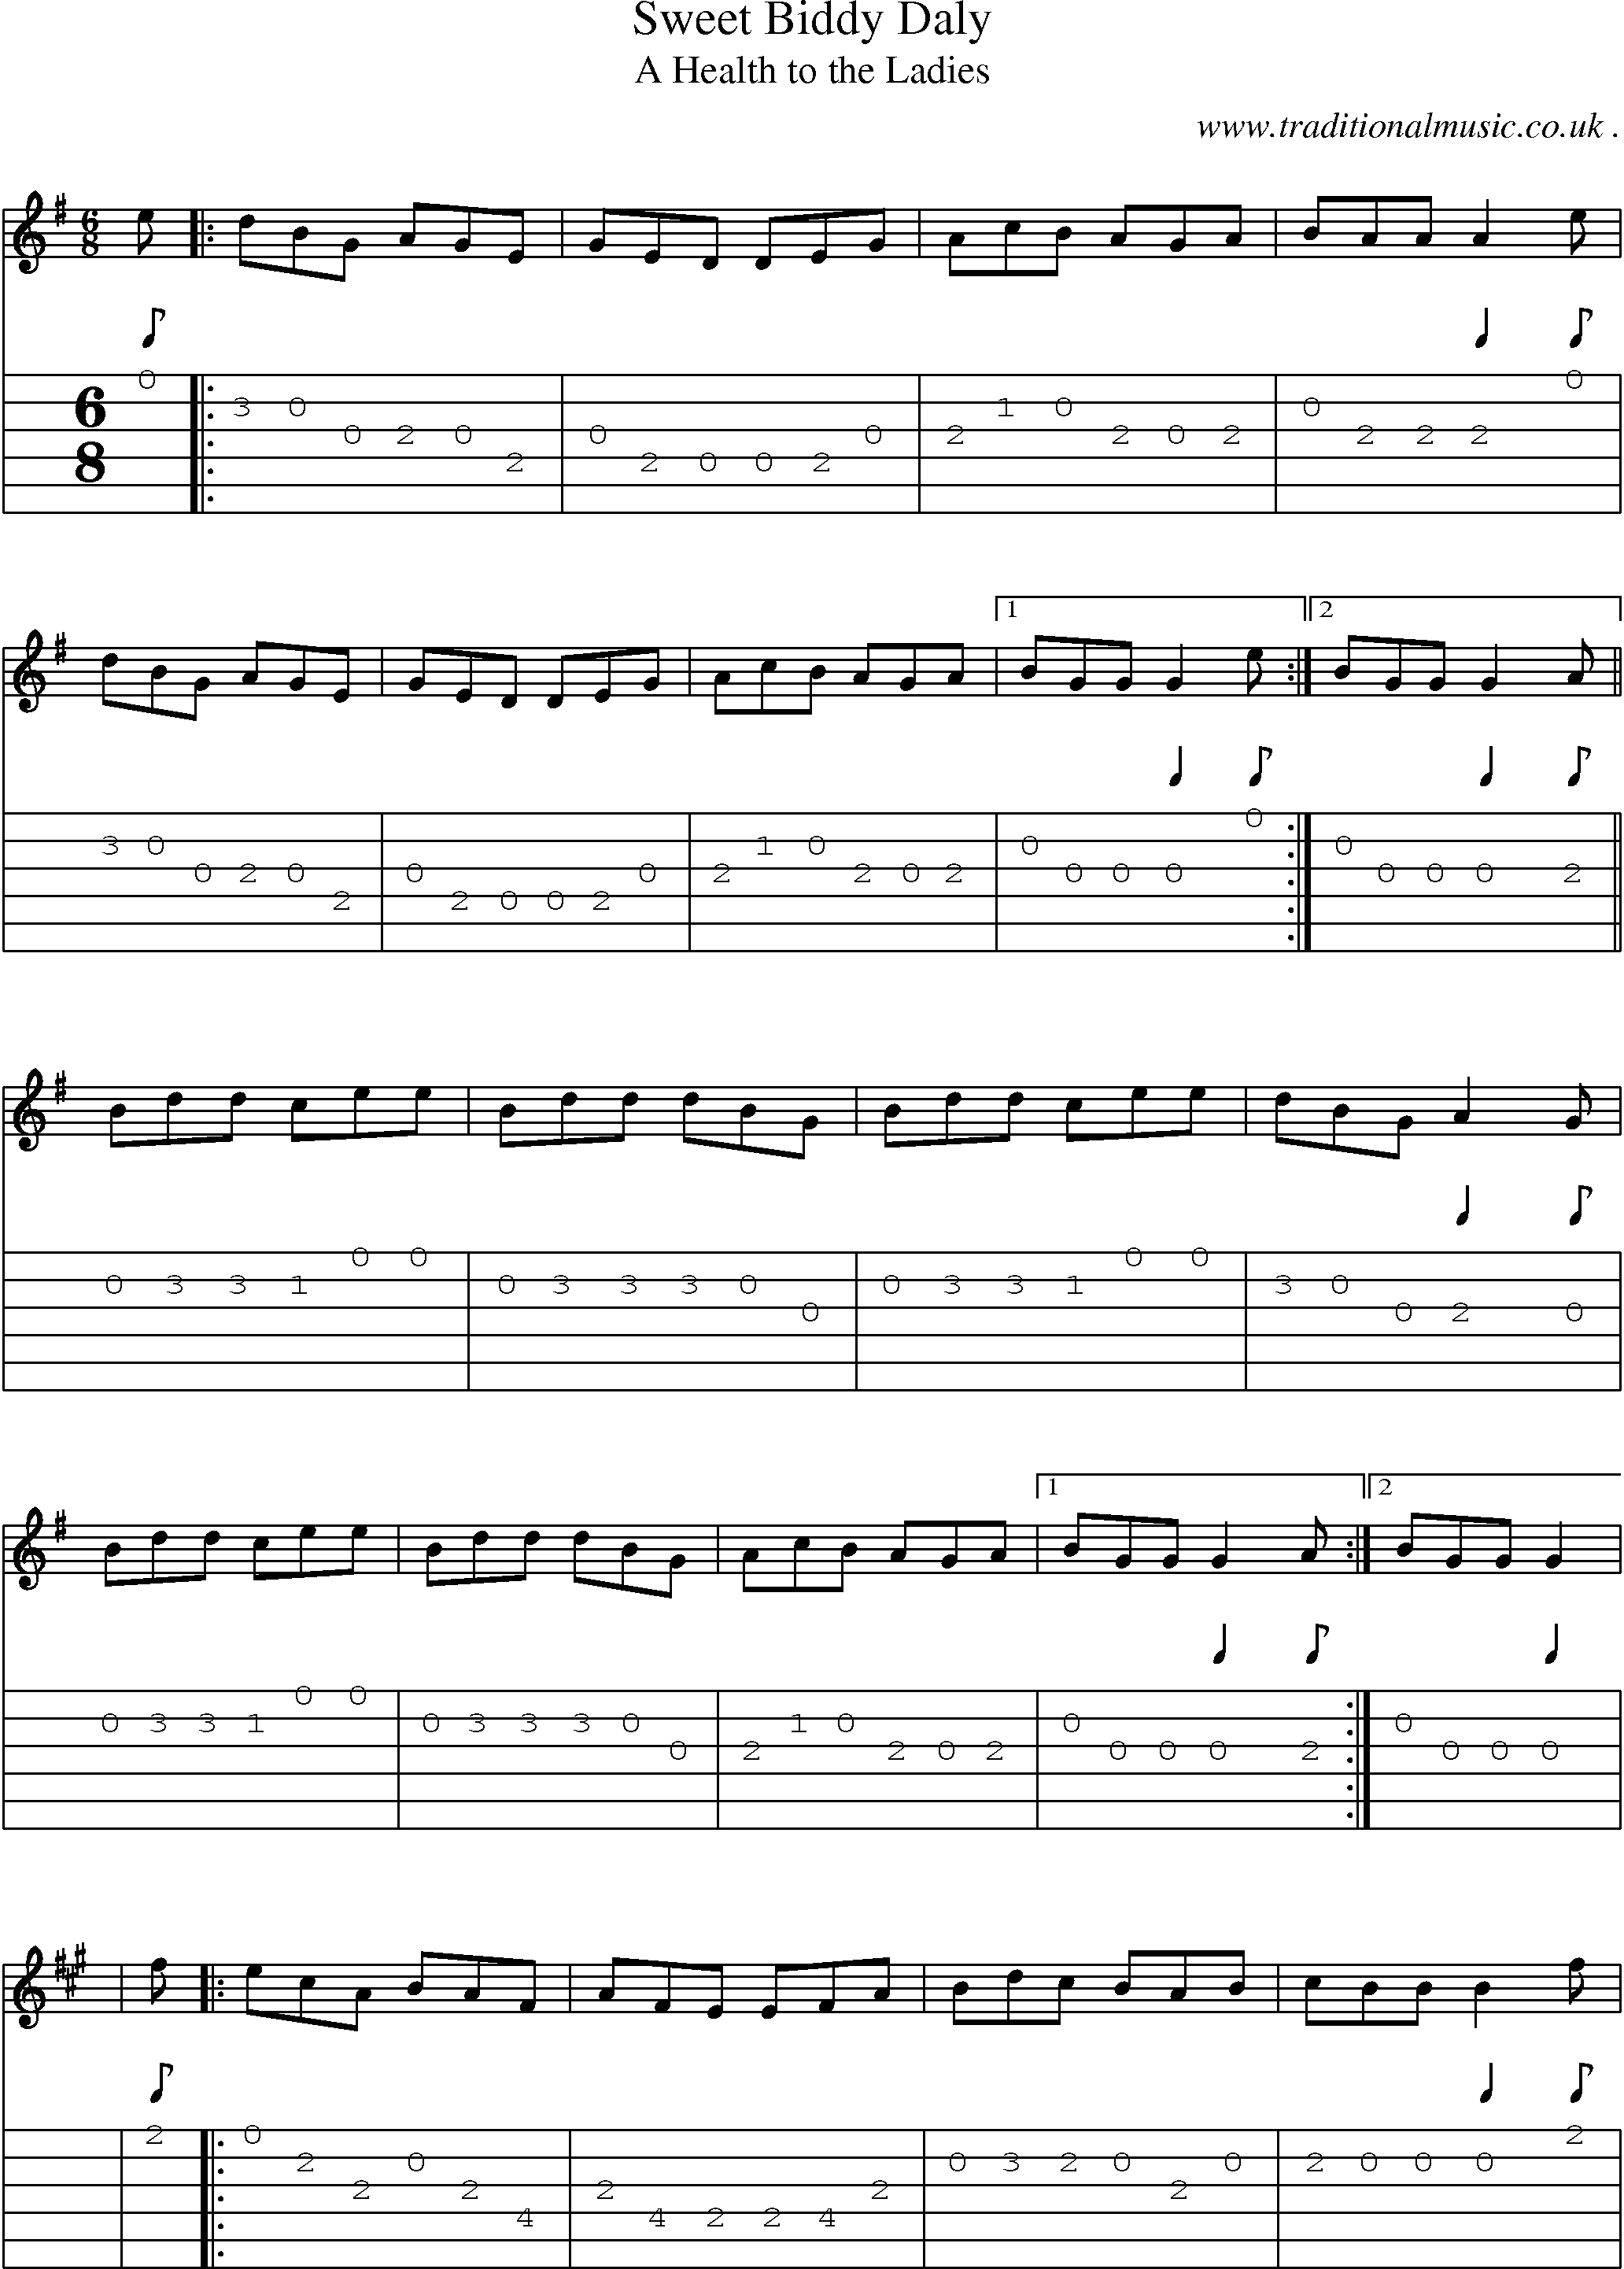 Sheet-Music and Guitar Tabs for Sweet Biddy Daly